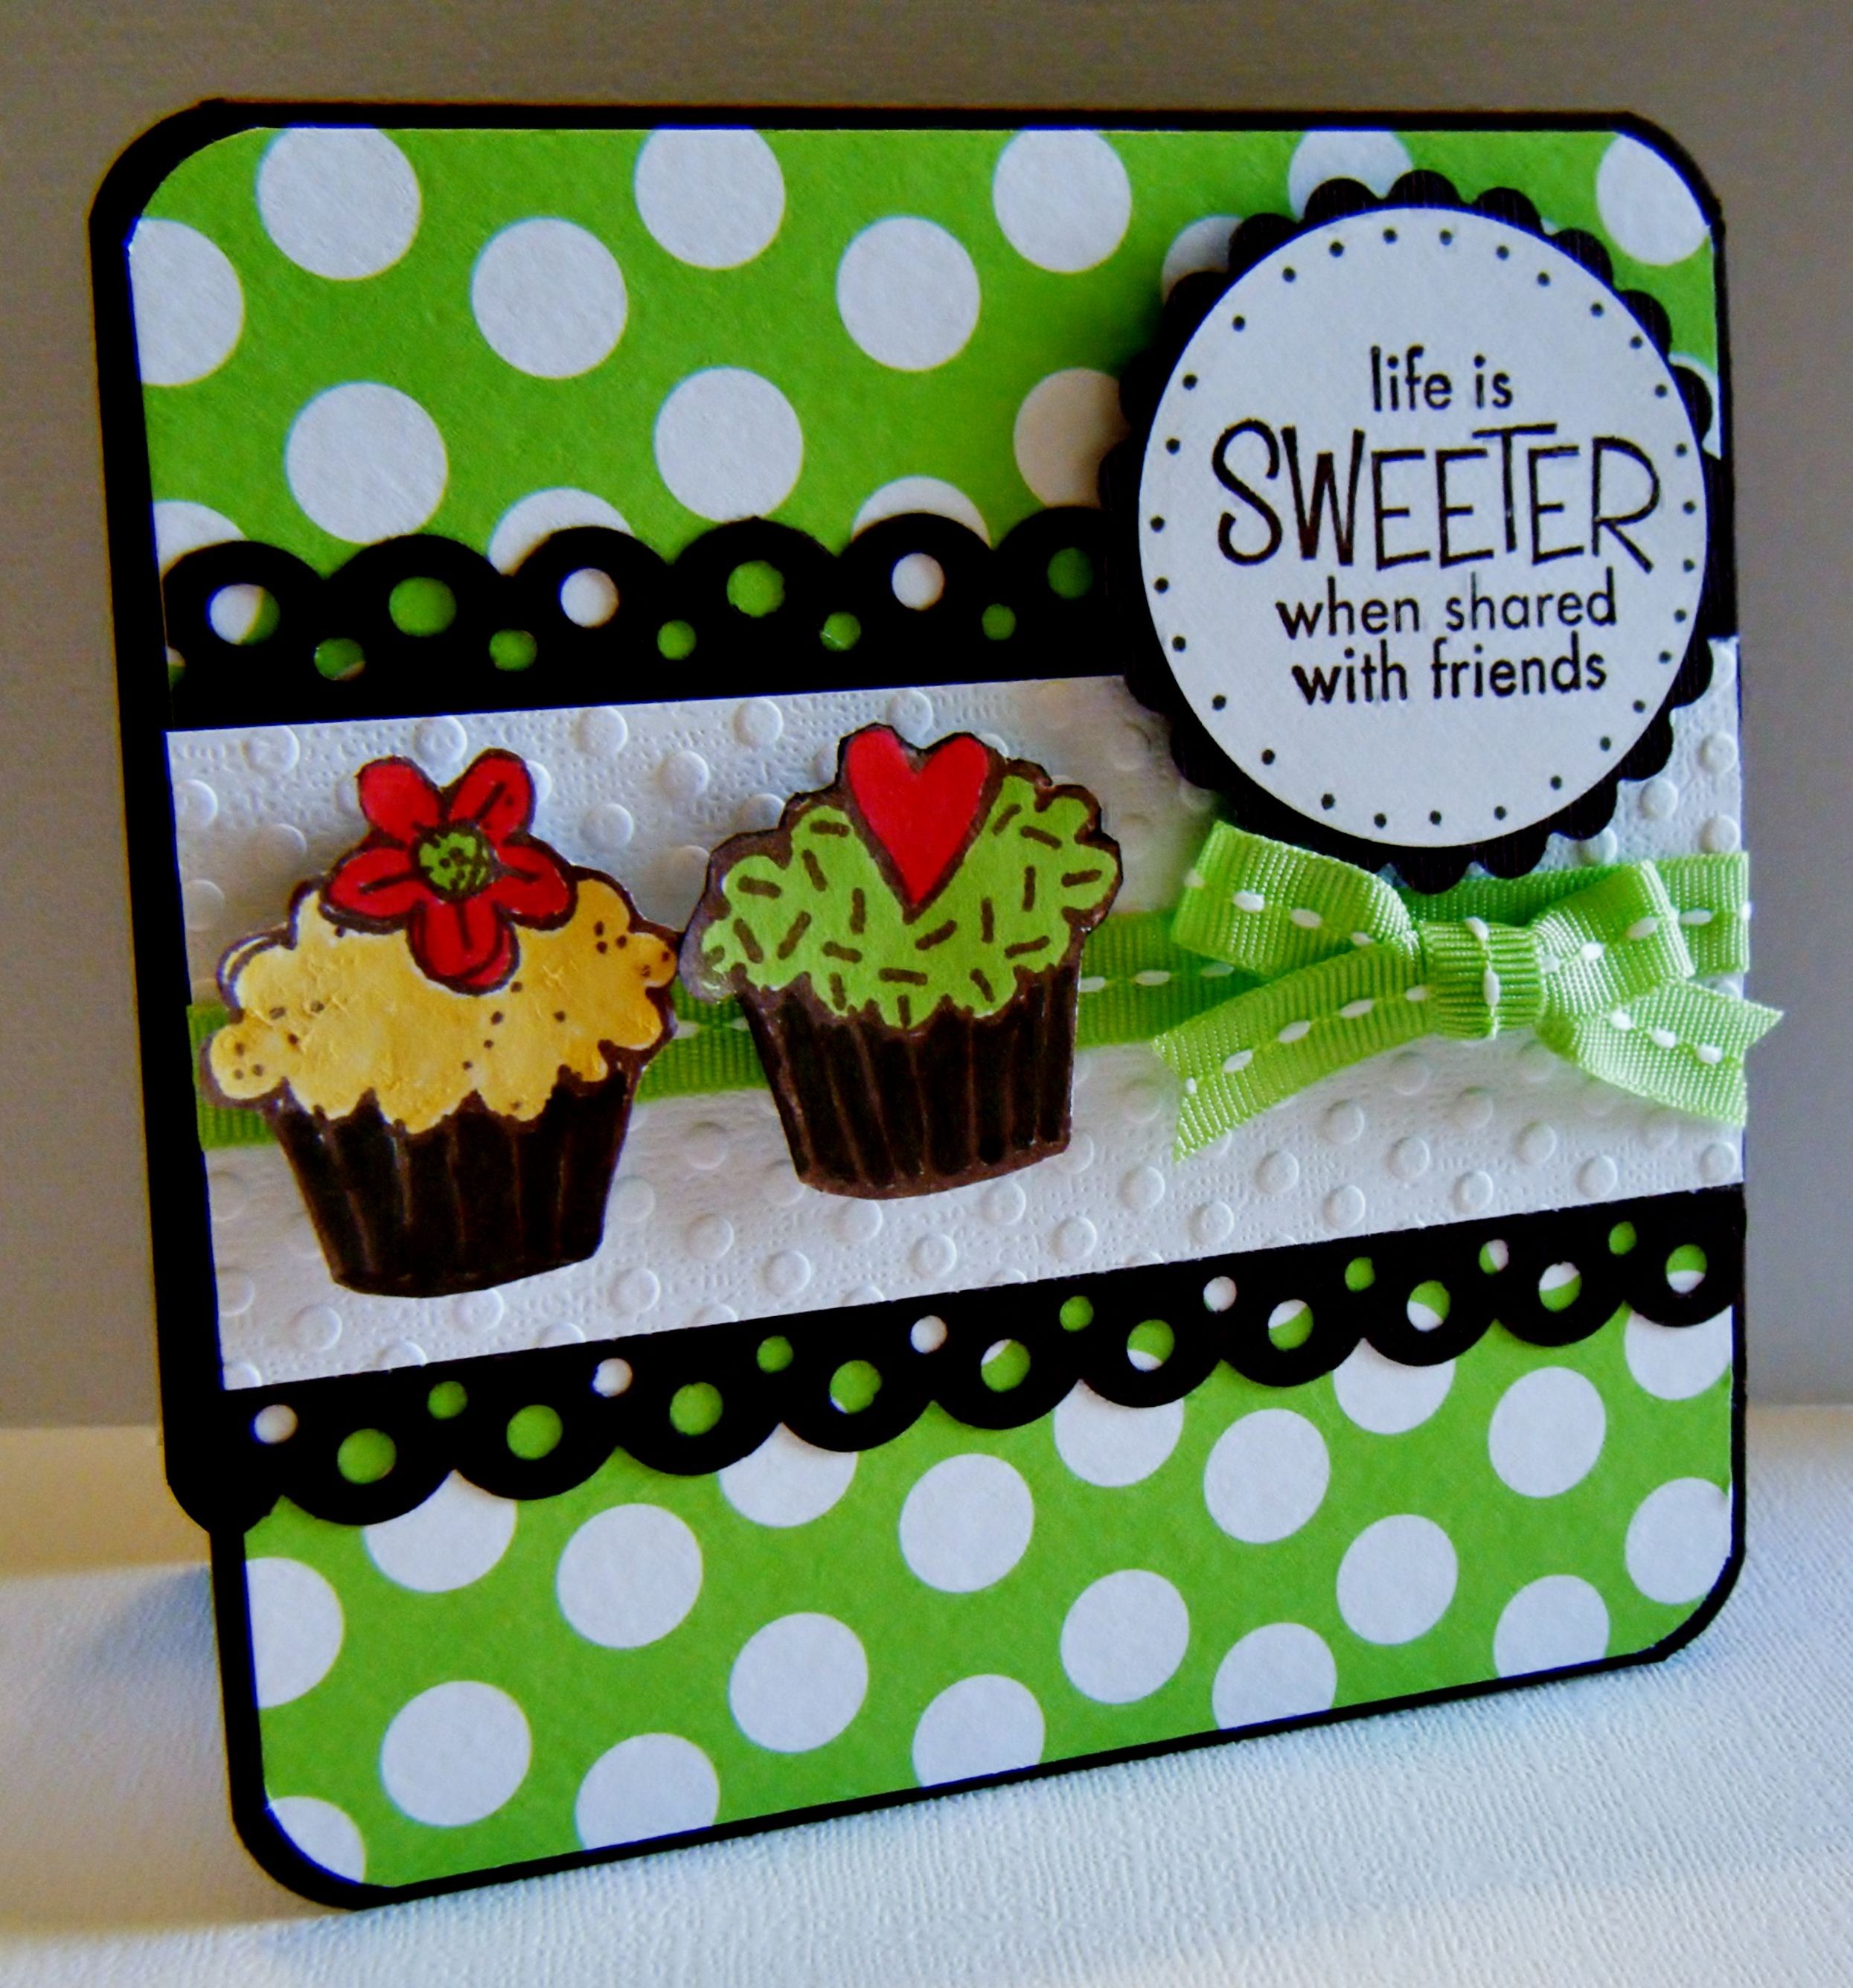 Cupcake Papercraft Life is Sweeter Scrapbook Created by Lisa Young